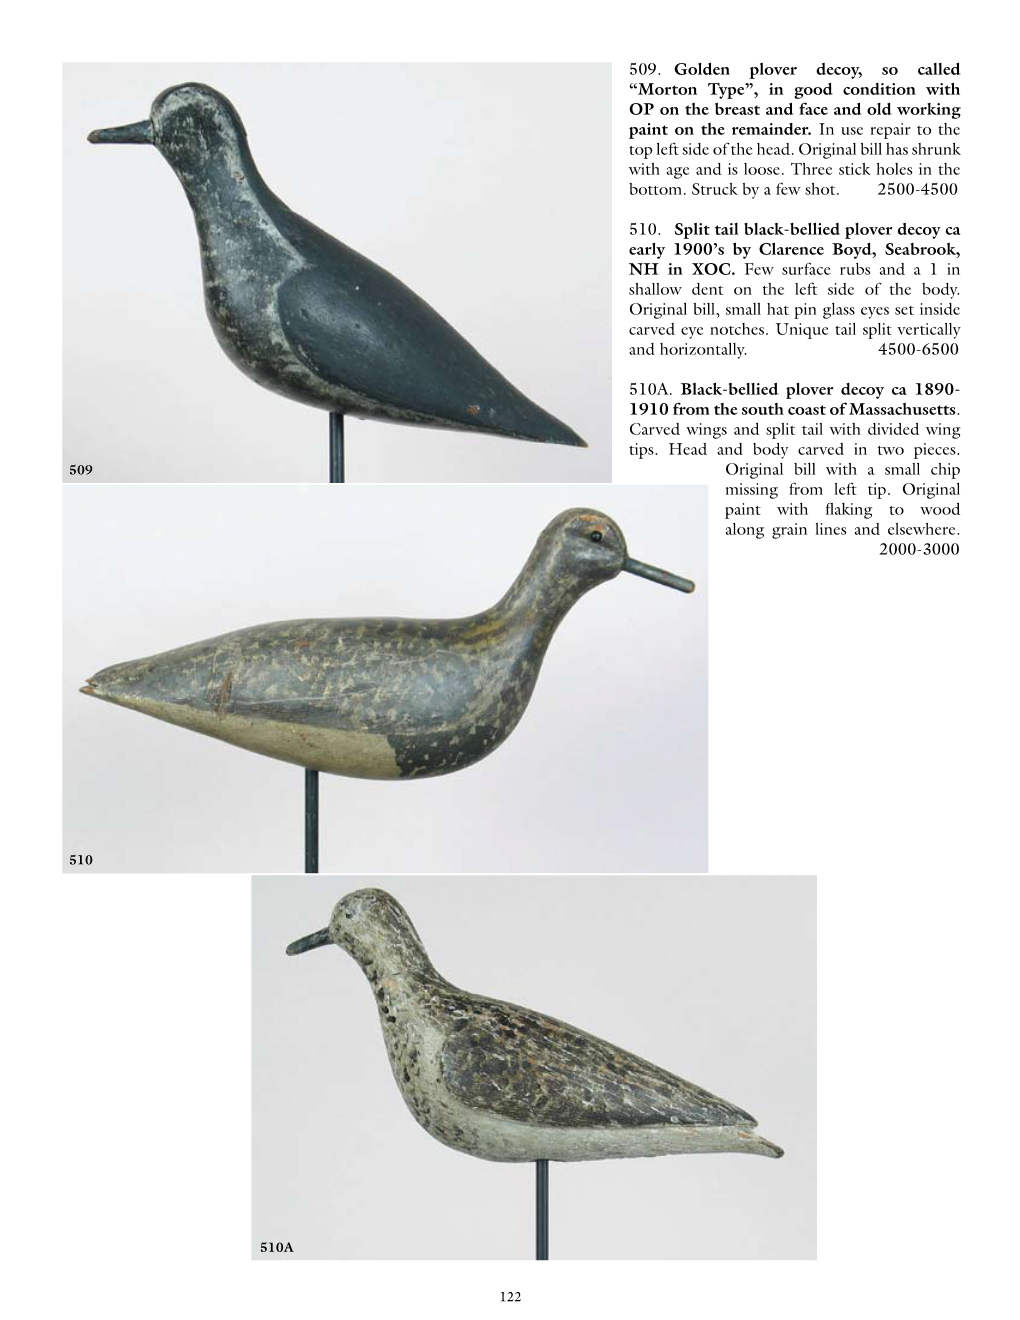 509. Golden Plover Decoy, So Called “Morton Type”, in Good Condition with OP on the Breast and Face and Old Working Paint on the Remainder